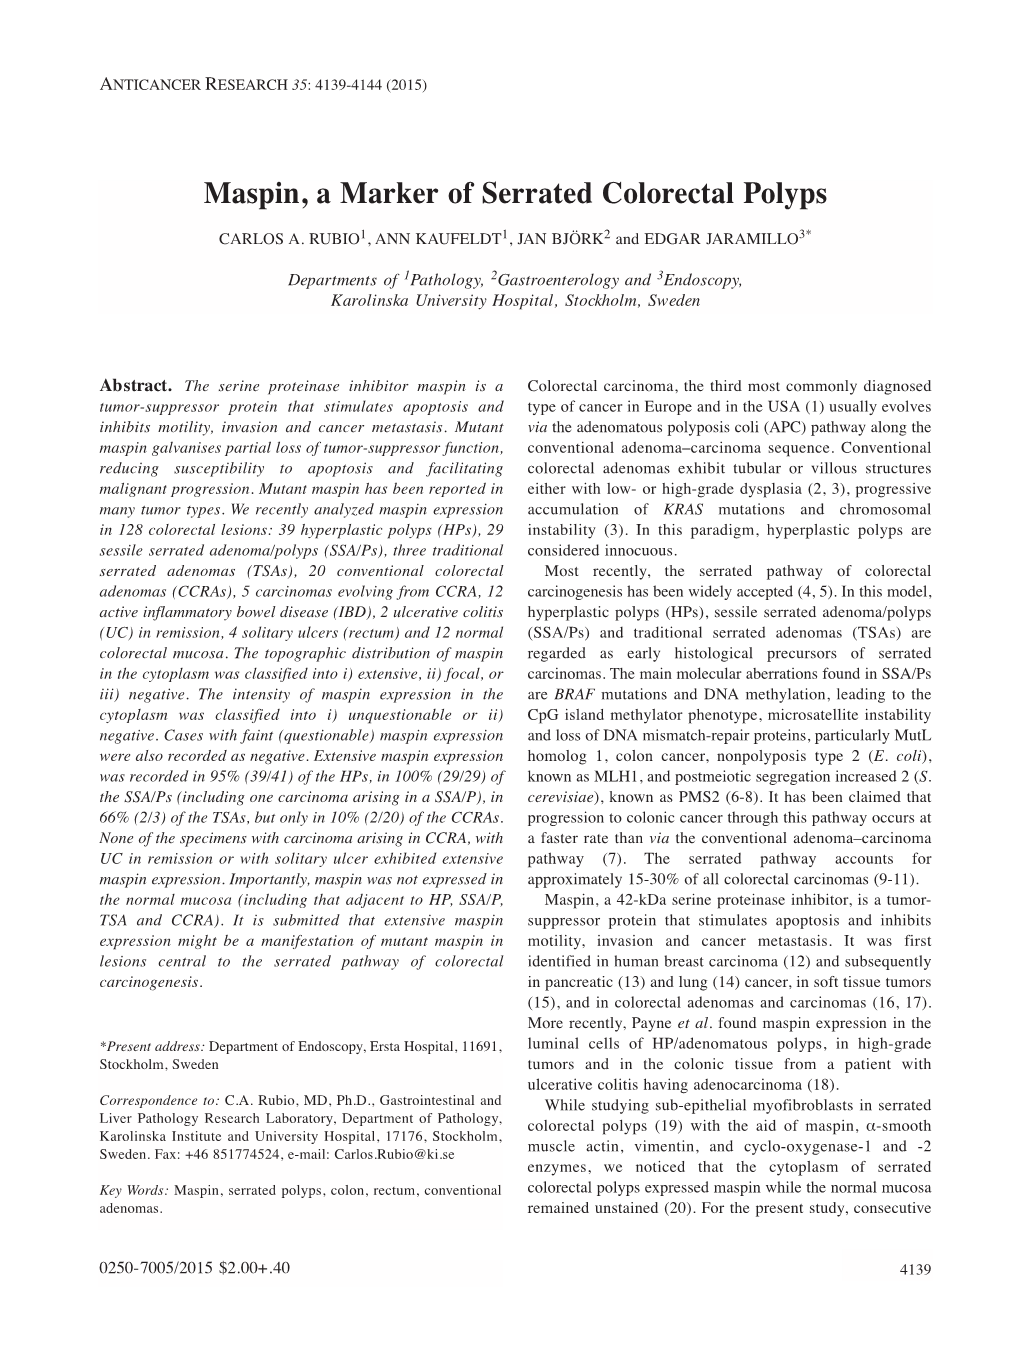 Maspin, a Marker of Serrated Colorectal Polyps